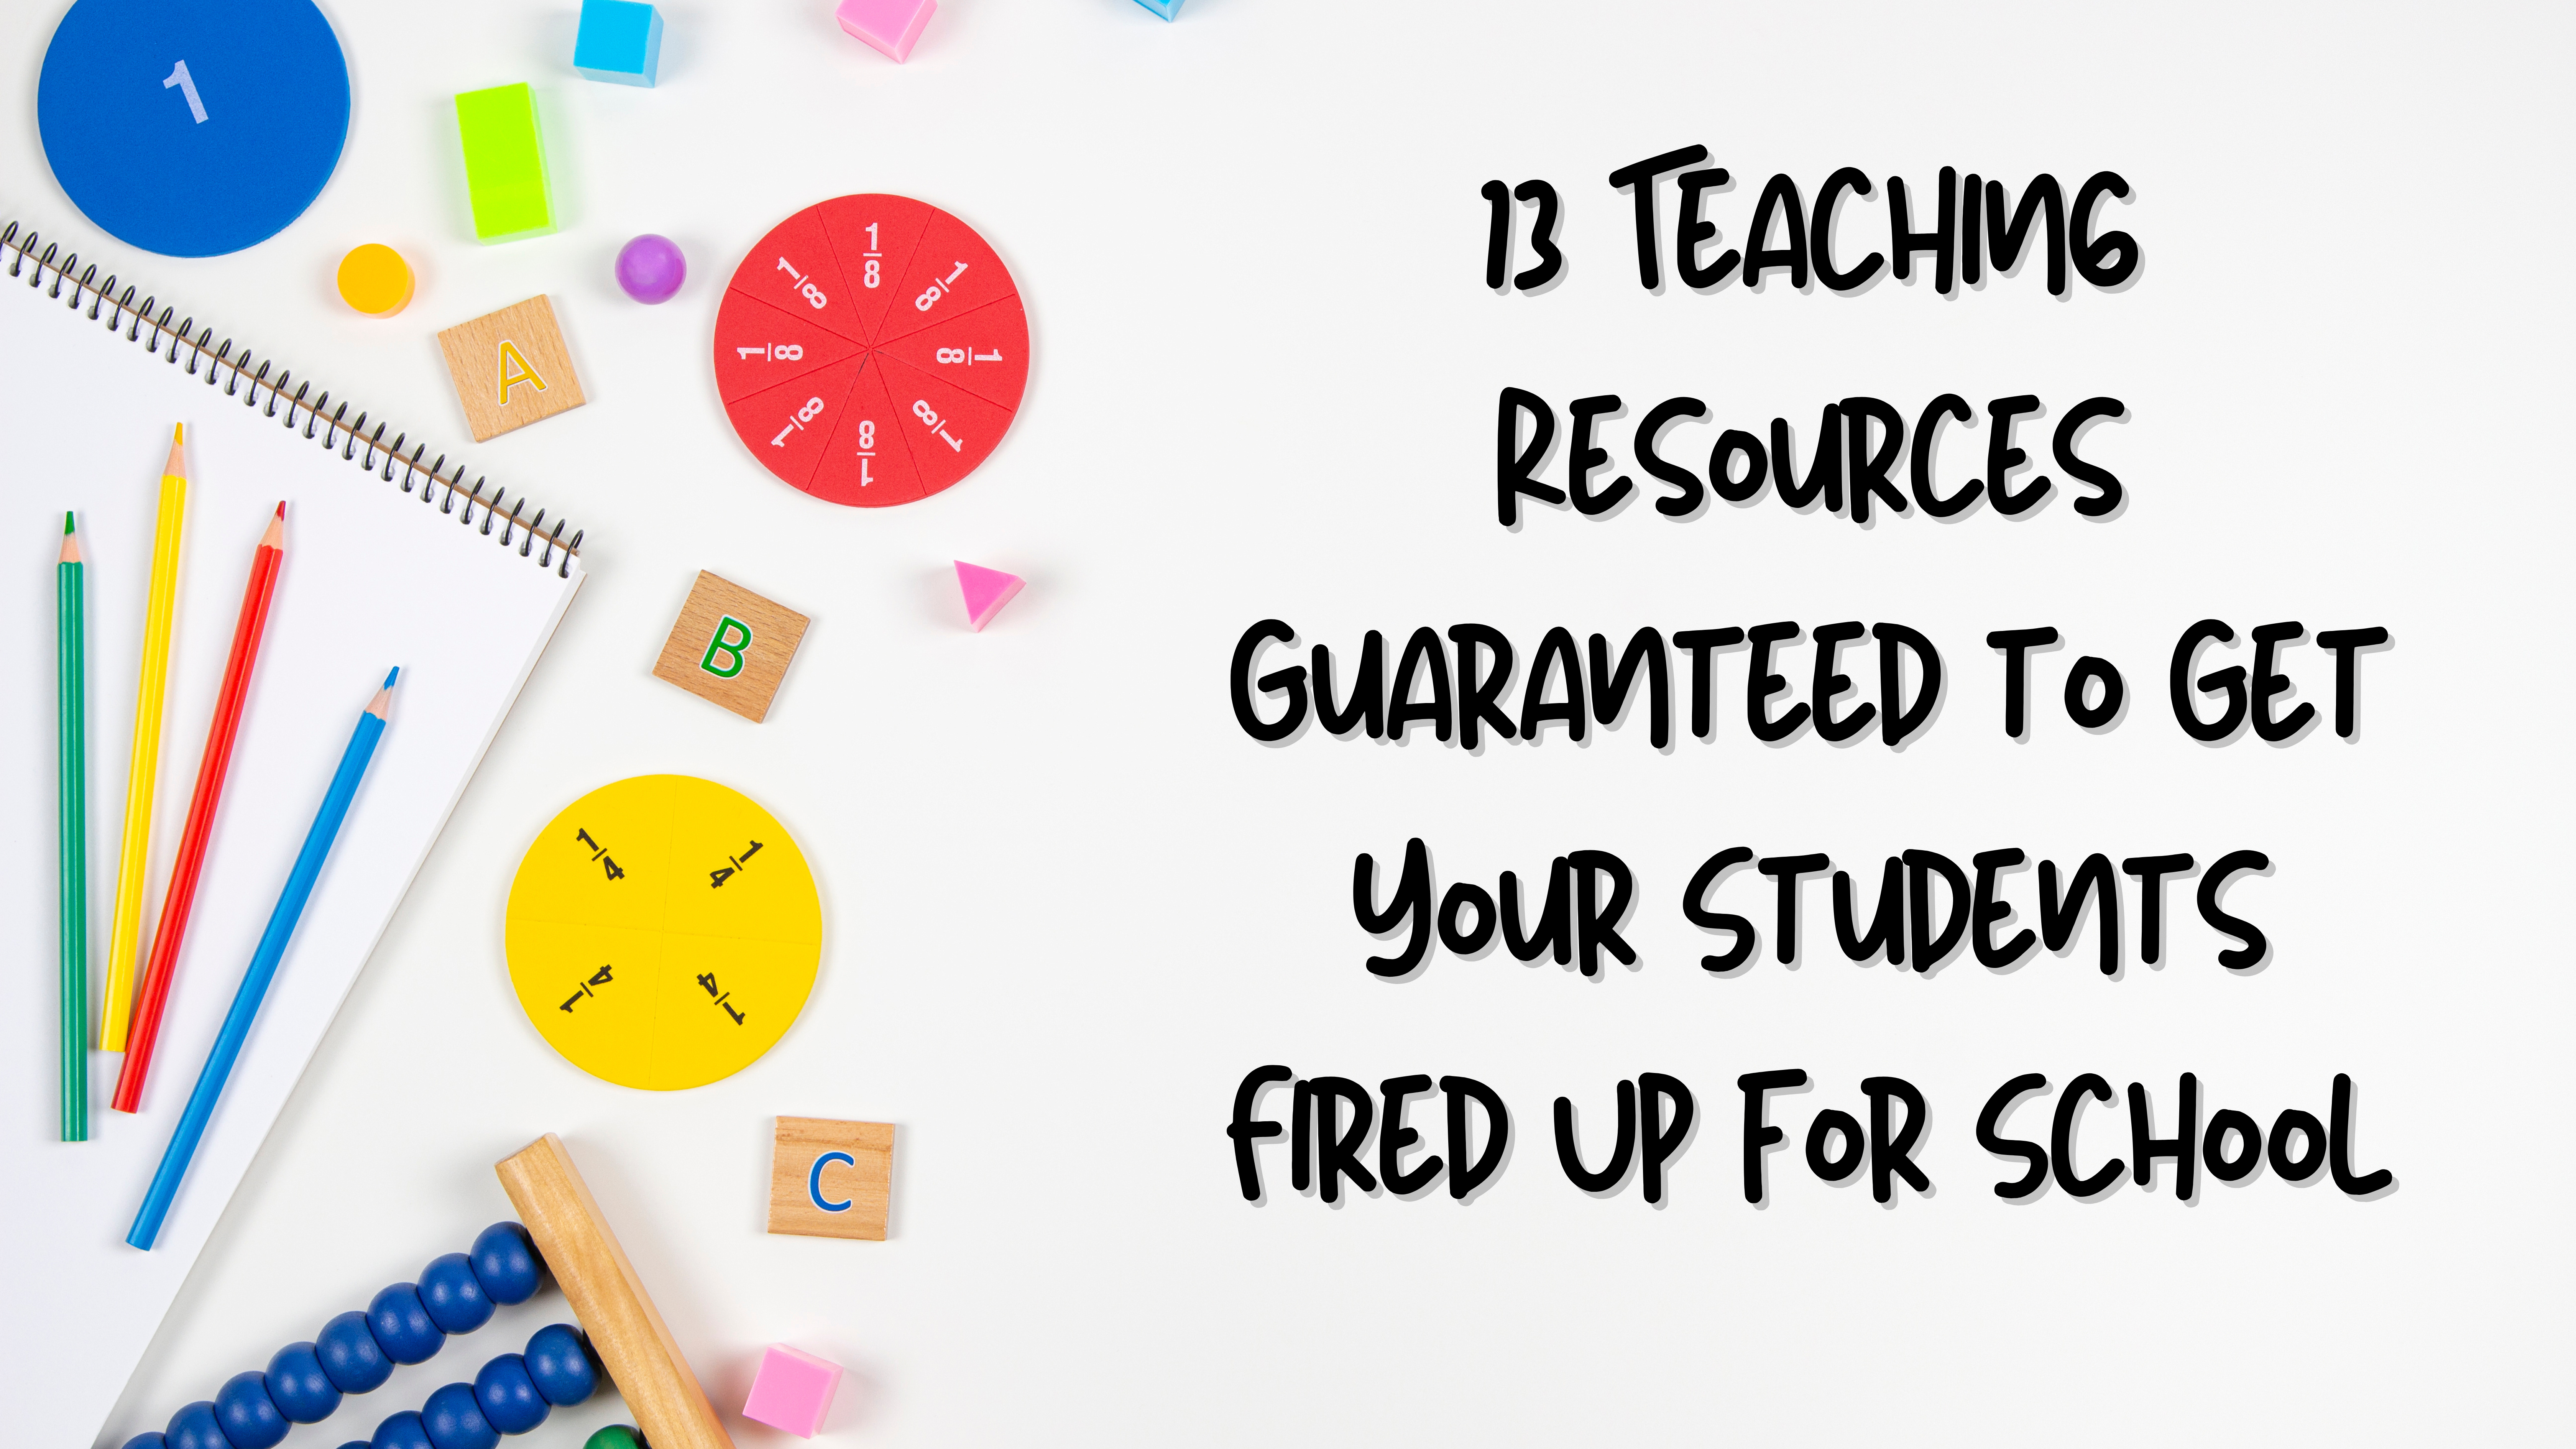 You are currently viewing 13 Teaching Resources Guaranteed to Get Your Students Fired Up for School